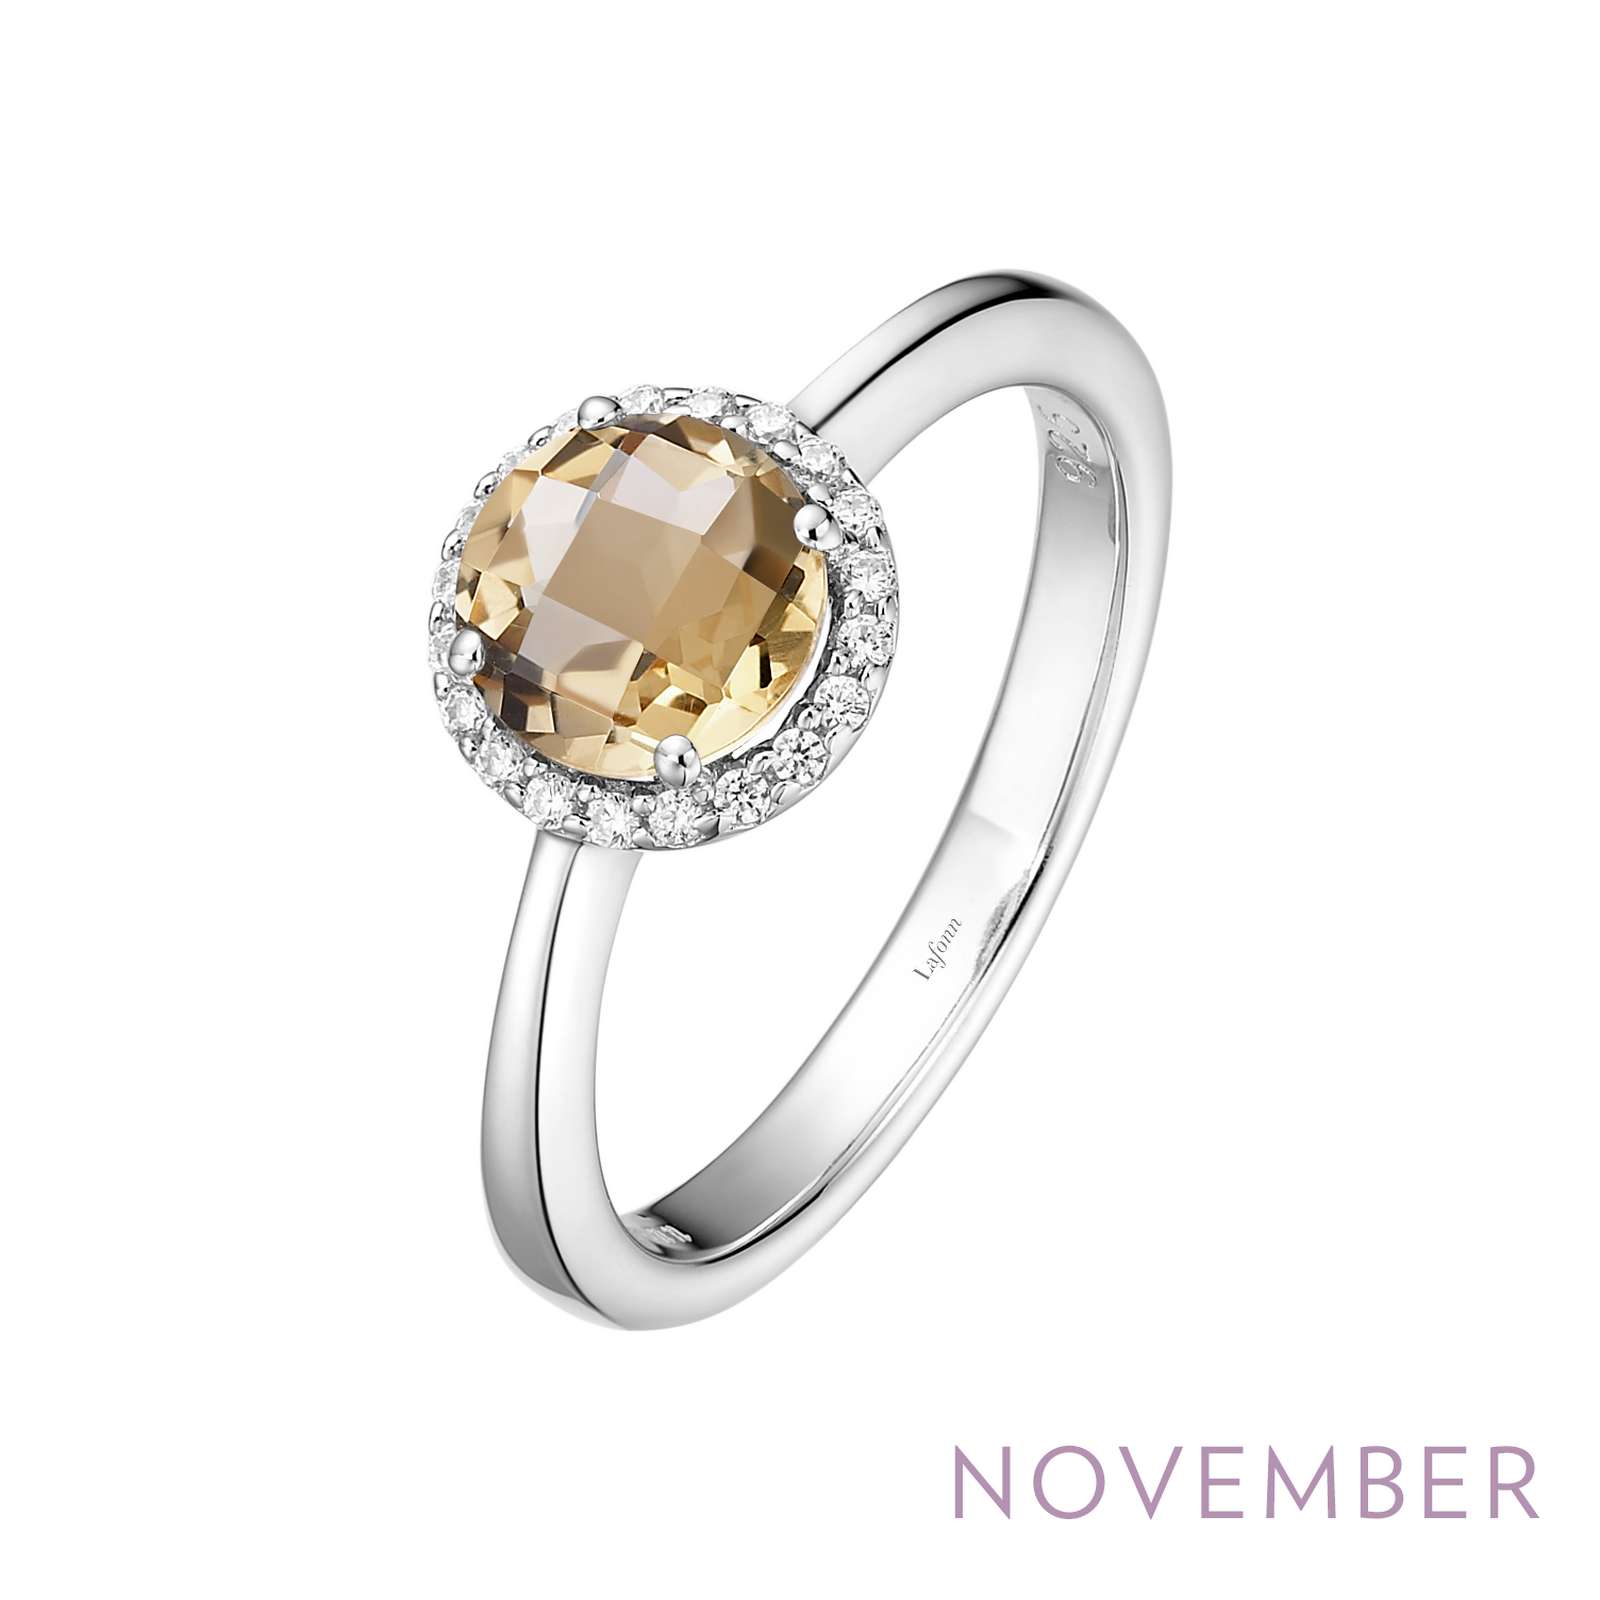 November Birthstone Ring Griner Jewelry Co. Moultrie, GA